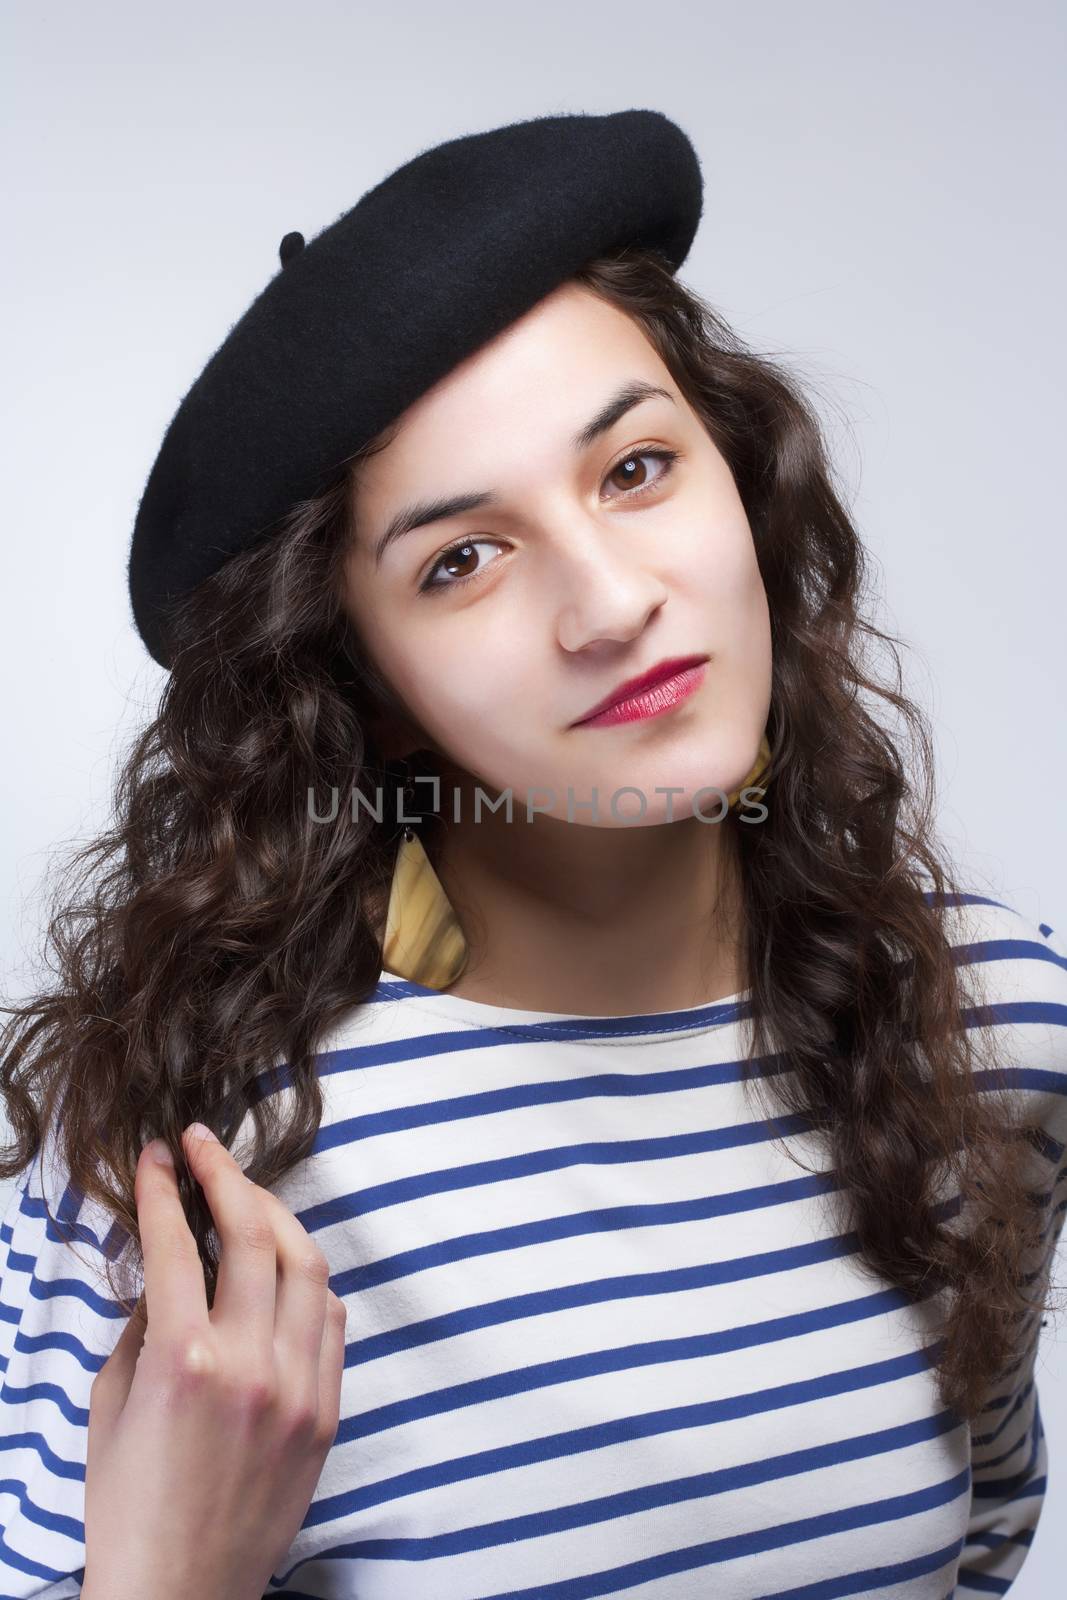 Woman with French Style Beret Hat and Striped T-shirt by courtyardpix